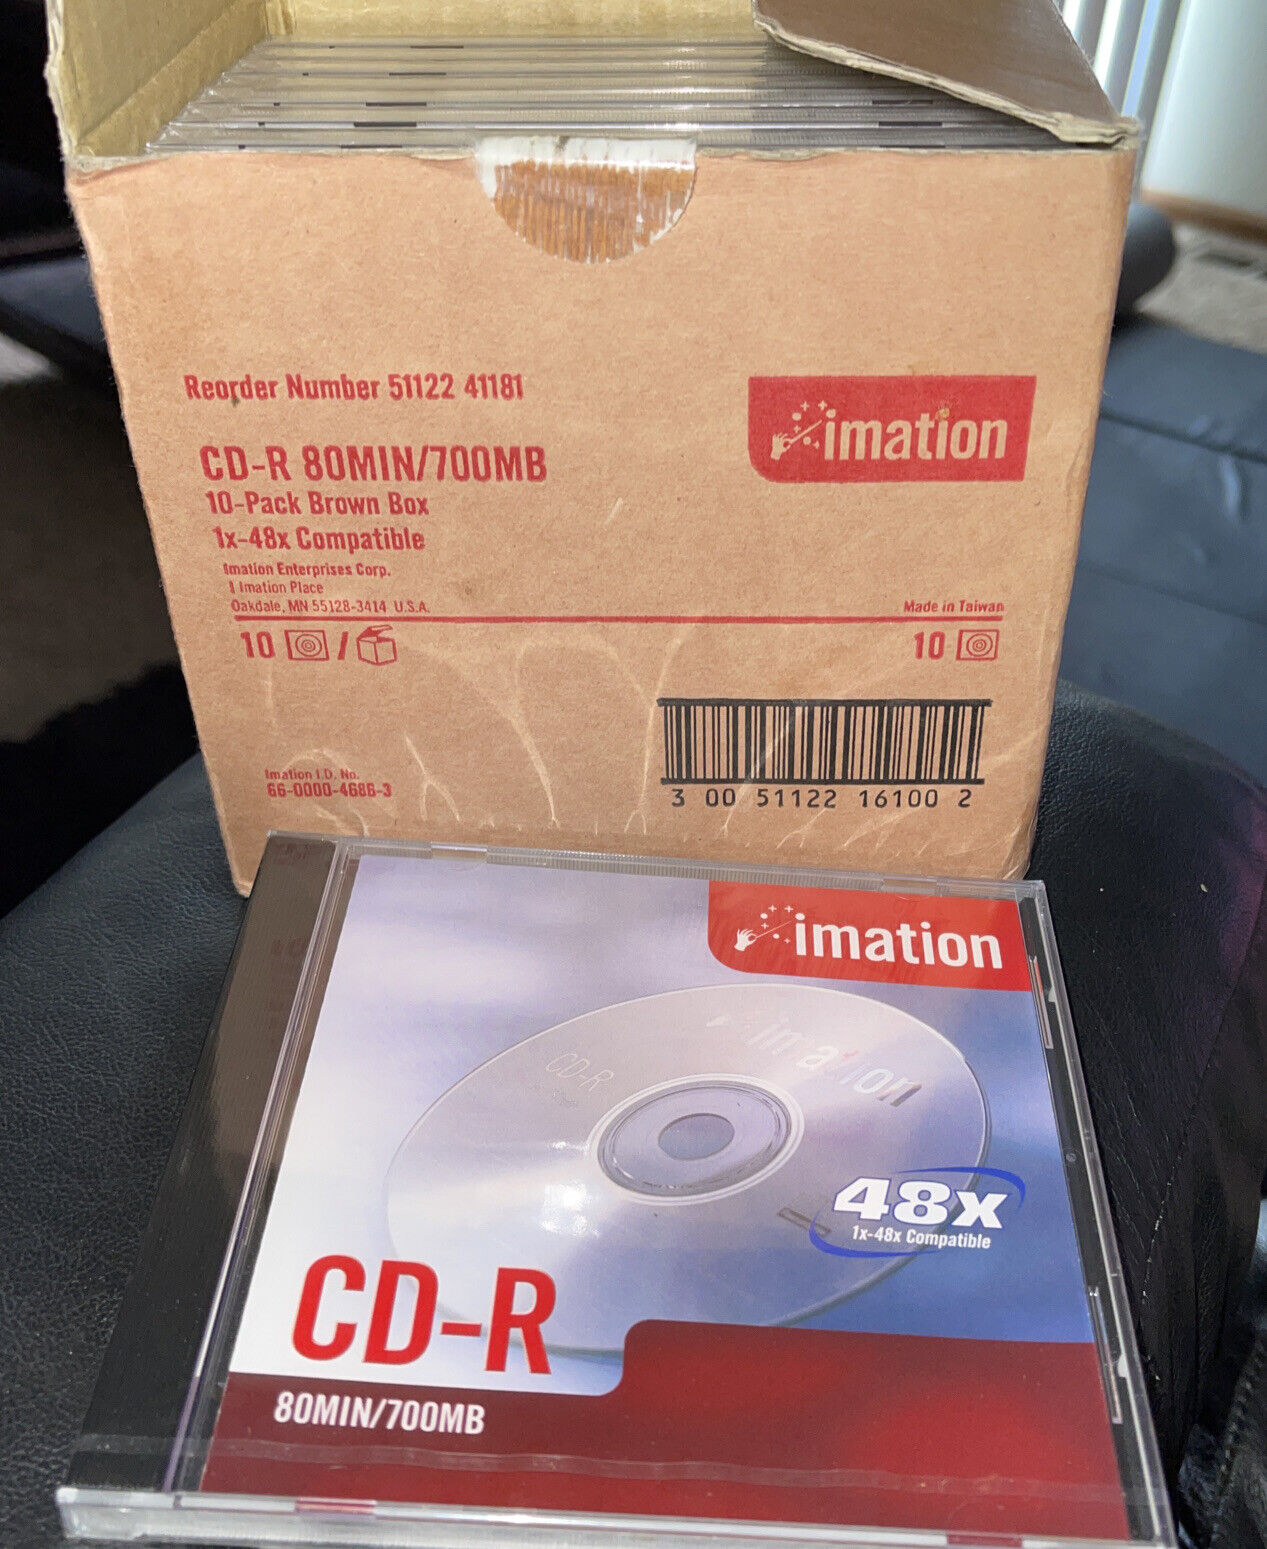 Imation CD-R 80 MIN/700MB 10-Pack 1x-48X Compatible Business Select = Lot of 10